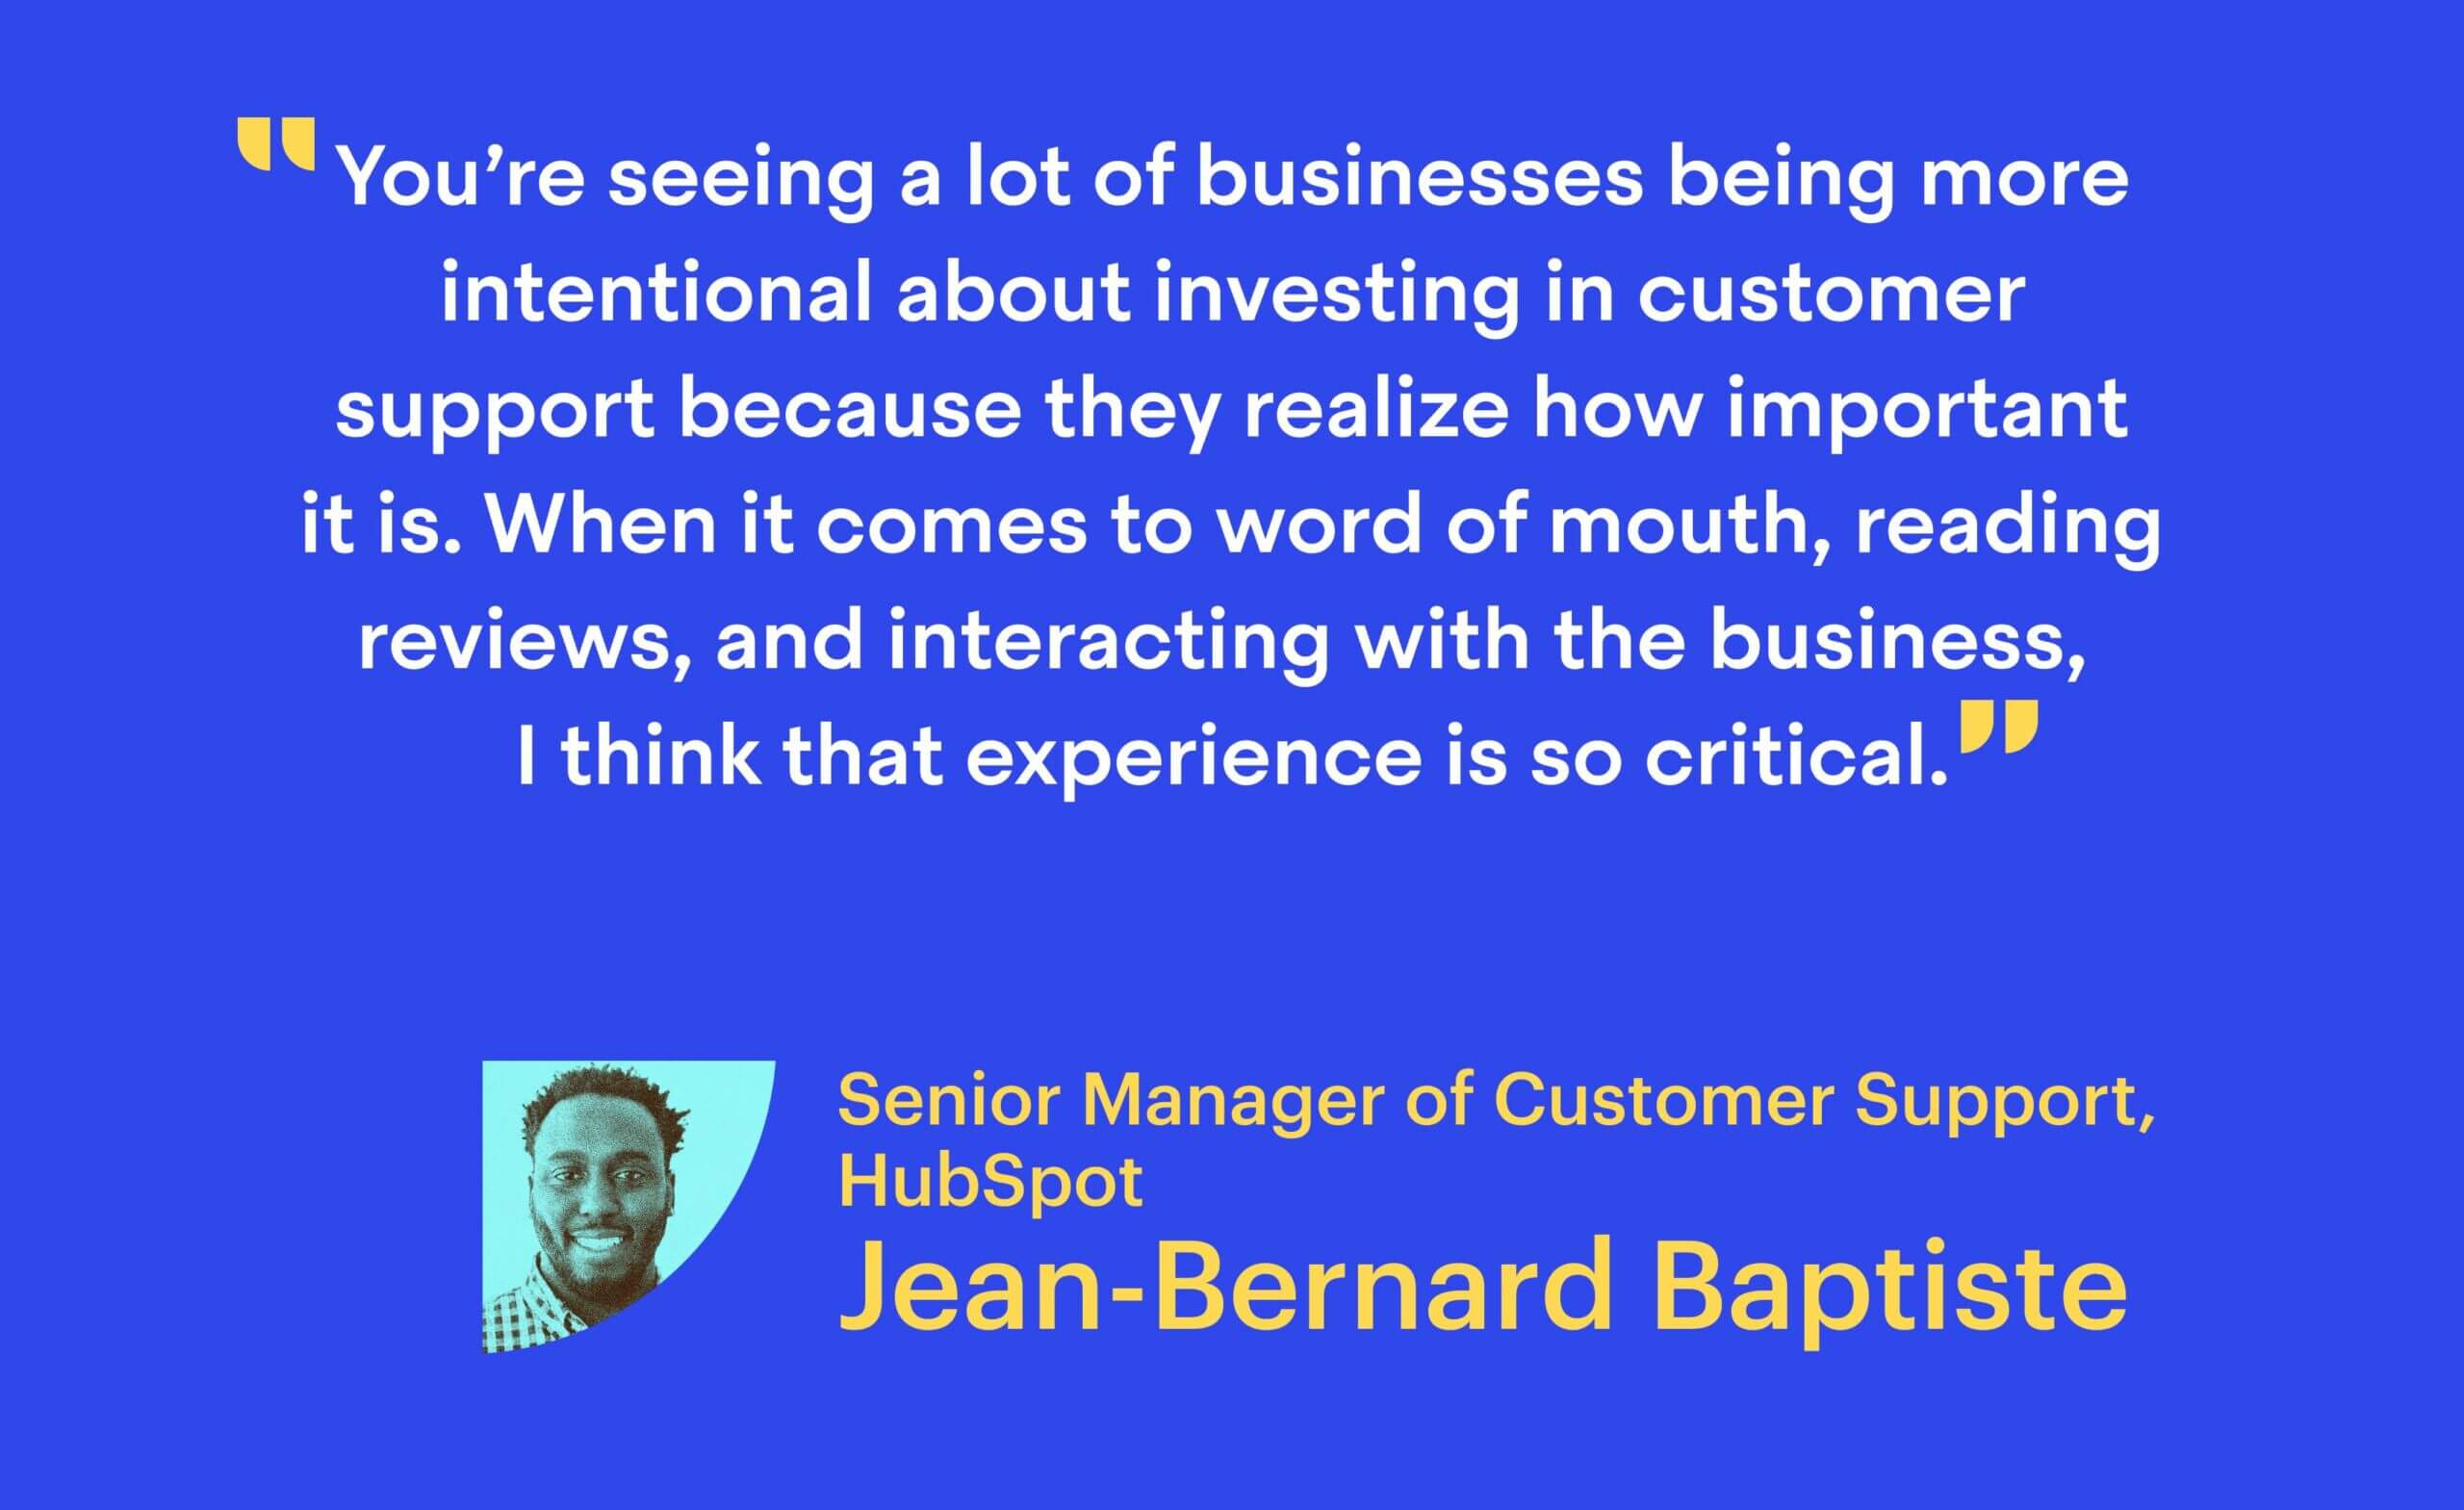 “You’re seeing a lot of businesses being more intentional about investing in customer support because they realize how important it is. When it comes to word of mouth, reading reviews, and interacting with the business, I think that experience is so critical.” Jean-Bernard Baptiste, Senior Manager of Customer Support at HubSpot